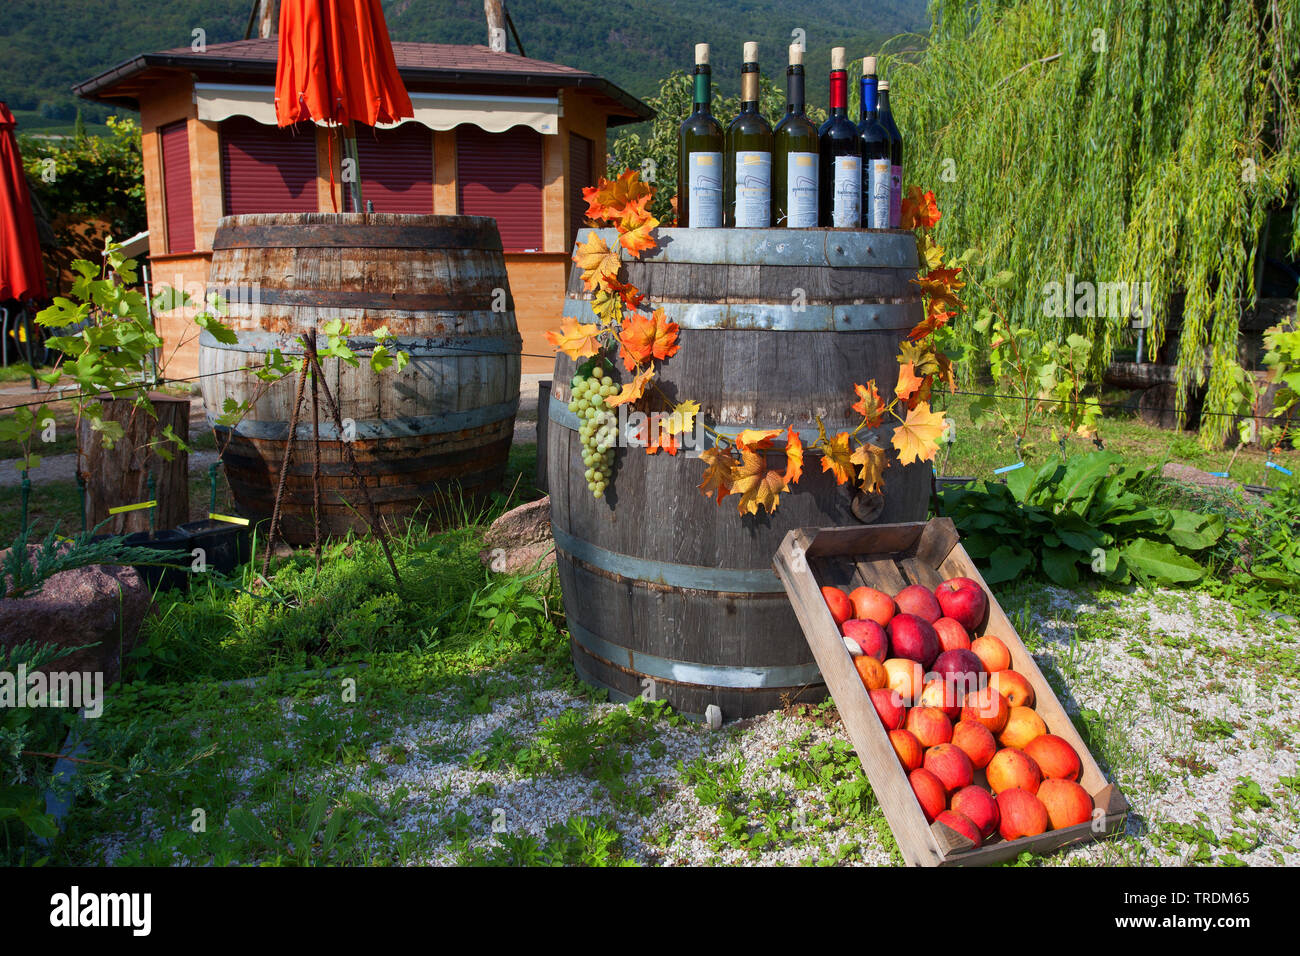 wine barrels, wine bottles and apple crate, Italy, South Tyrol, Trentino, Kaltern Stock Photo